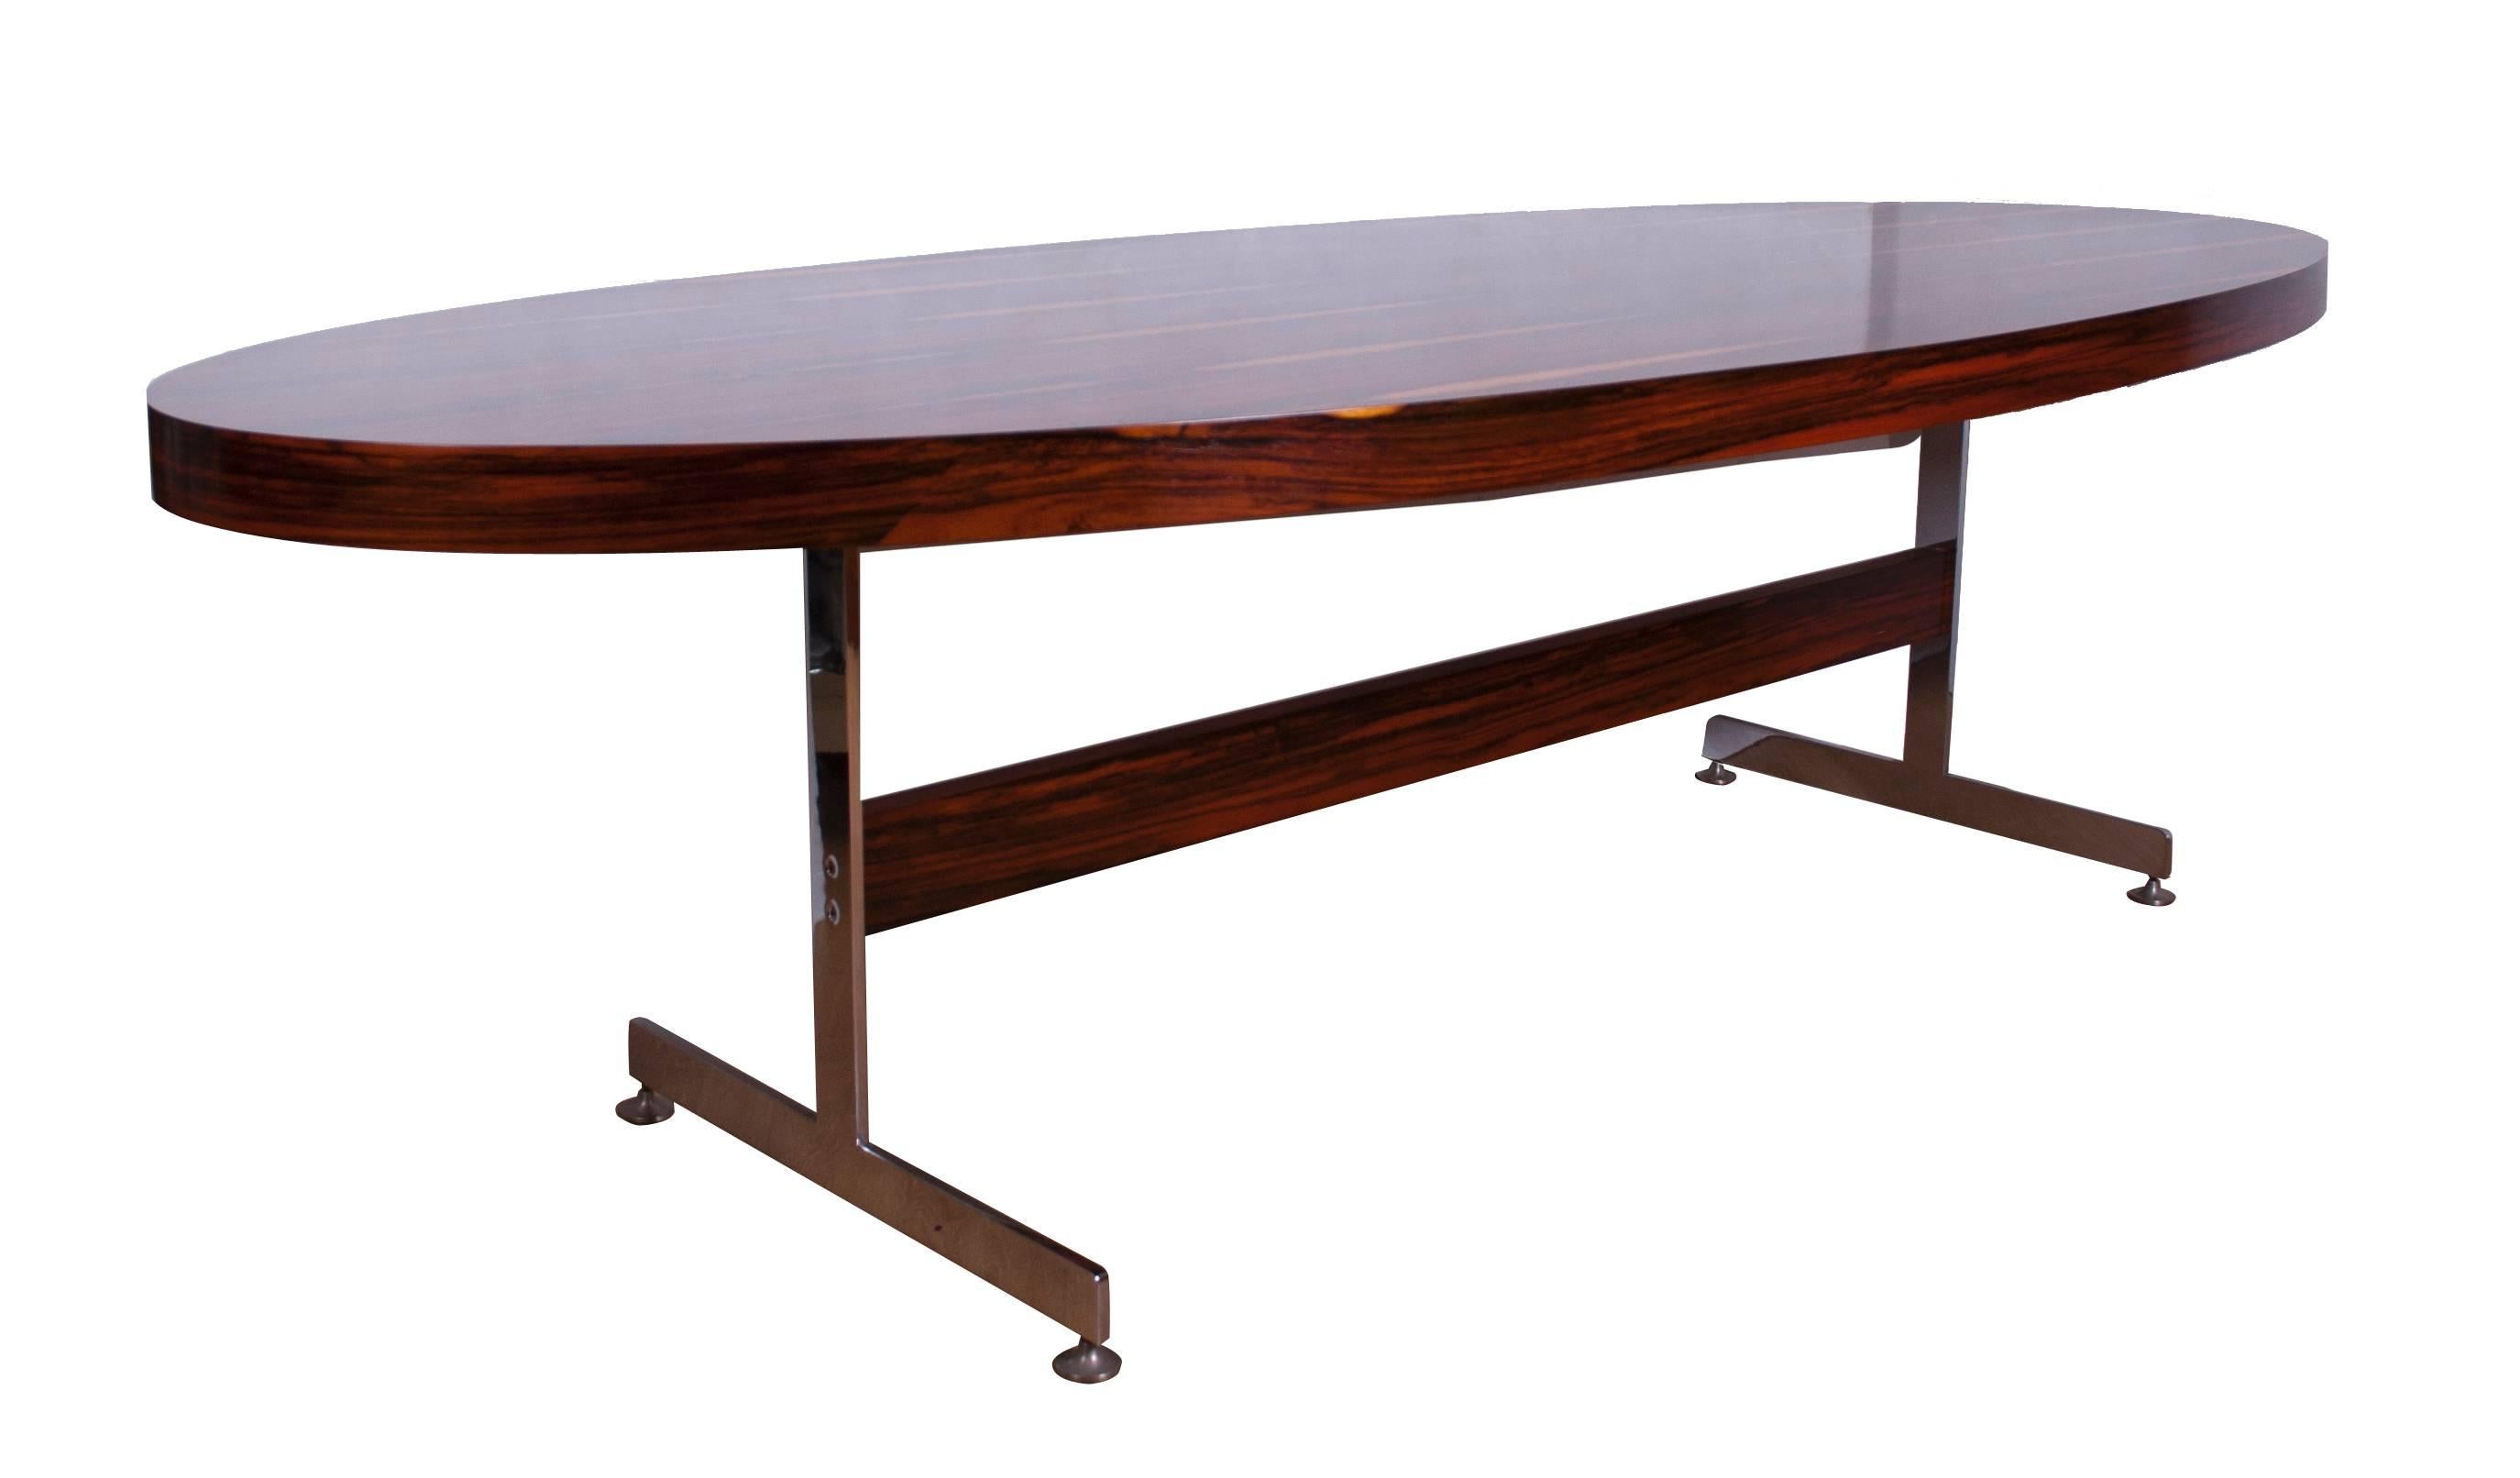 Merrow Associates rosewood and chrome conference table designed by Richard Young.
A very rare item from Merrow Associates, stunning Brazilian Rosewood on high quality flat chrome frame.
A truly smart conference table.
Dimensions: 74 cm H 259 cm W